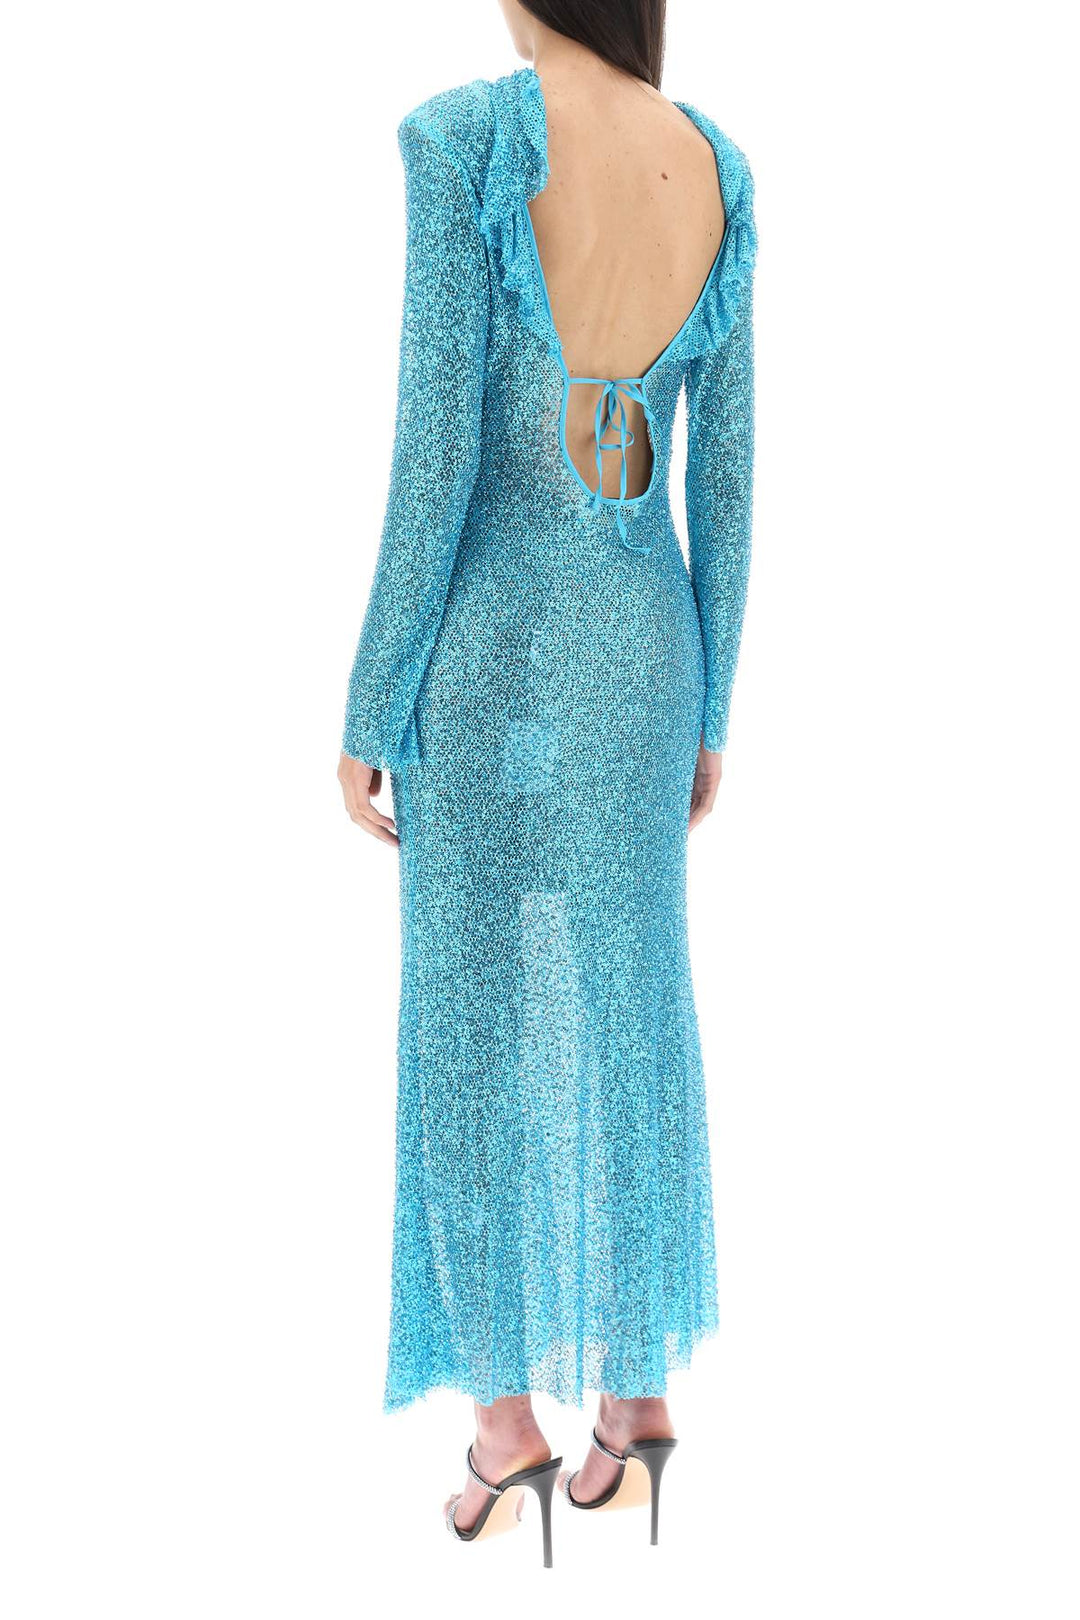 long-sleeved maxi dress with sequins and beads-2